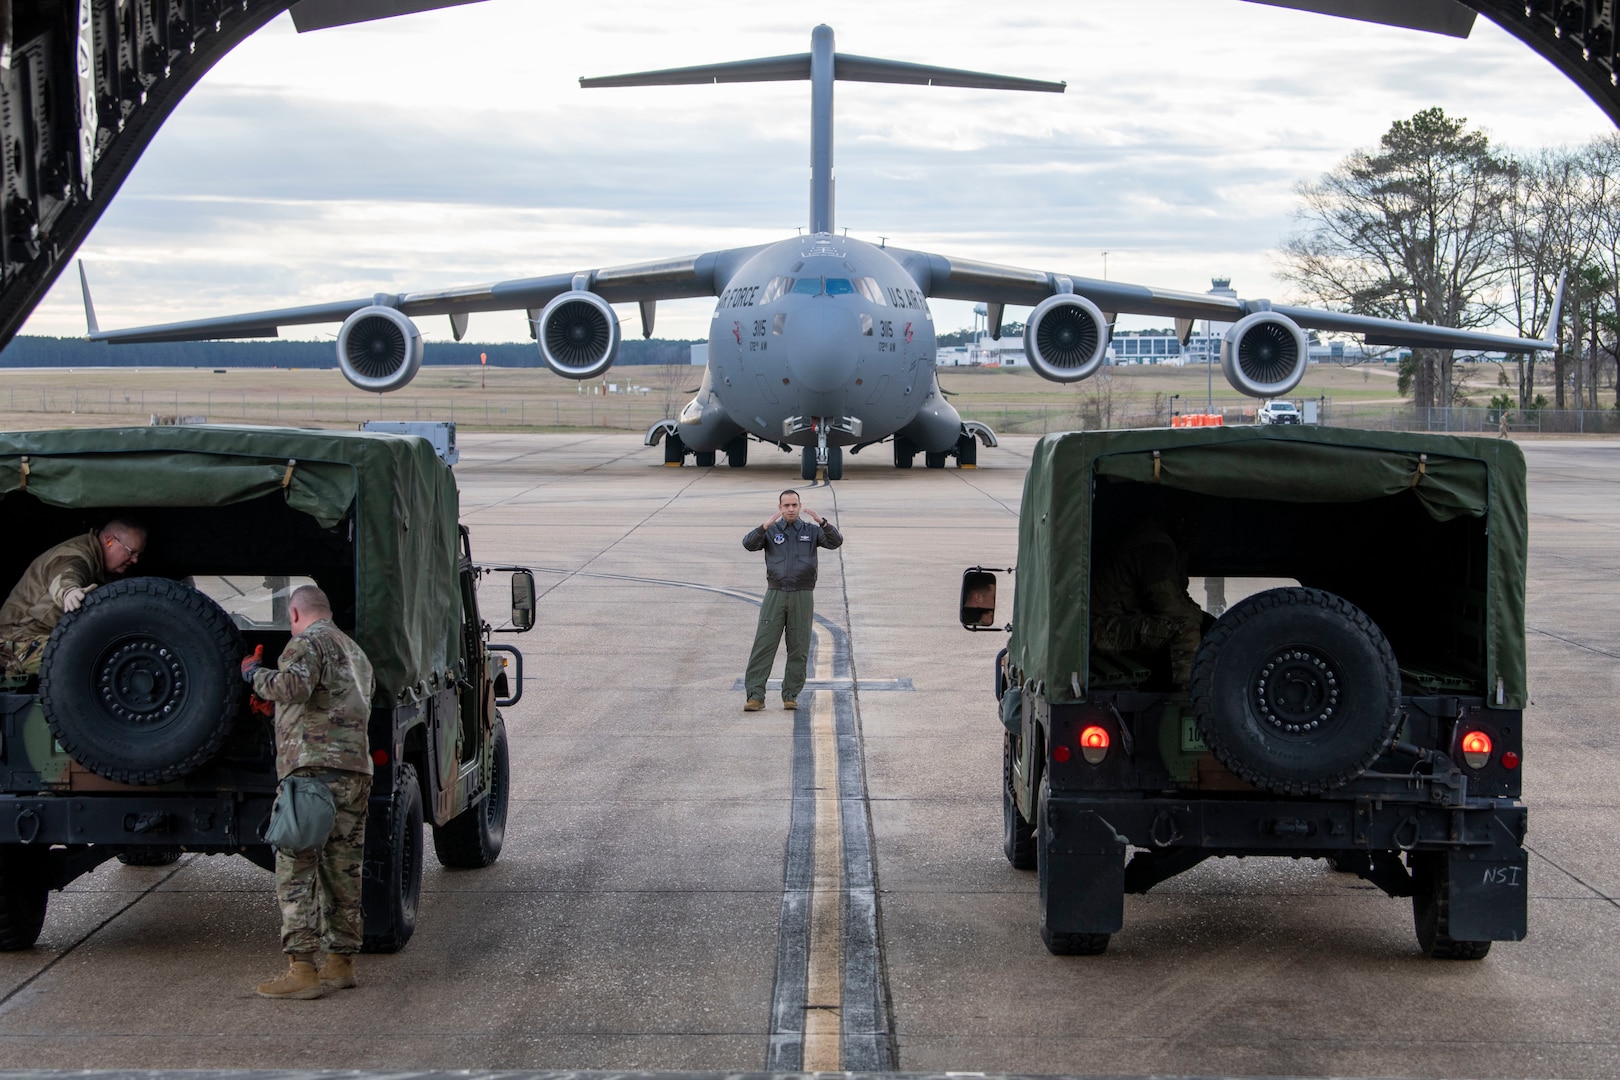 Tech. Sgt. Jerad Easterling, from the 172nd Operations Group, center, marshals a truck carrying medical personnel away from the tail of a C-17 Globemaster III aircraft on Jan. 28, 2023, in Jackson, Mississippi. This was part of a large-scale readiness exercise to test the capabilities of Mississippi Air National Guard Airmen in a contested environment.